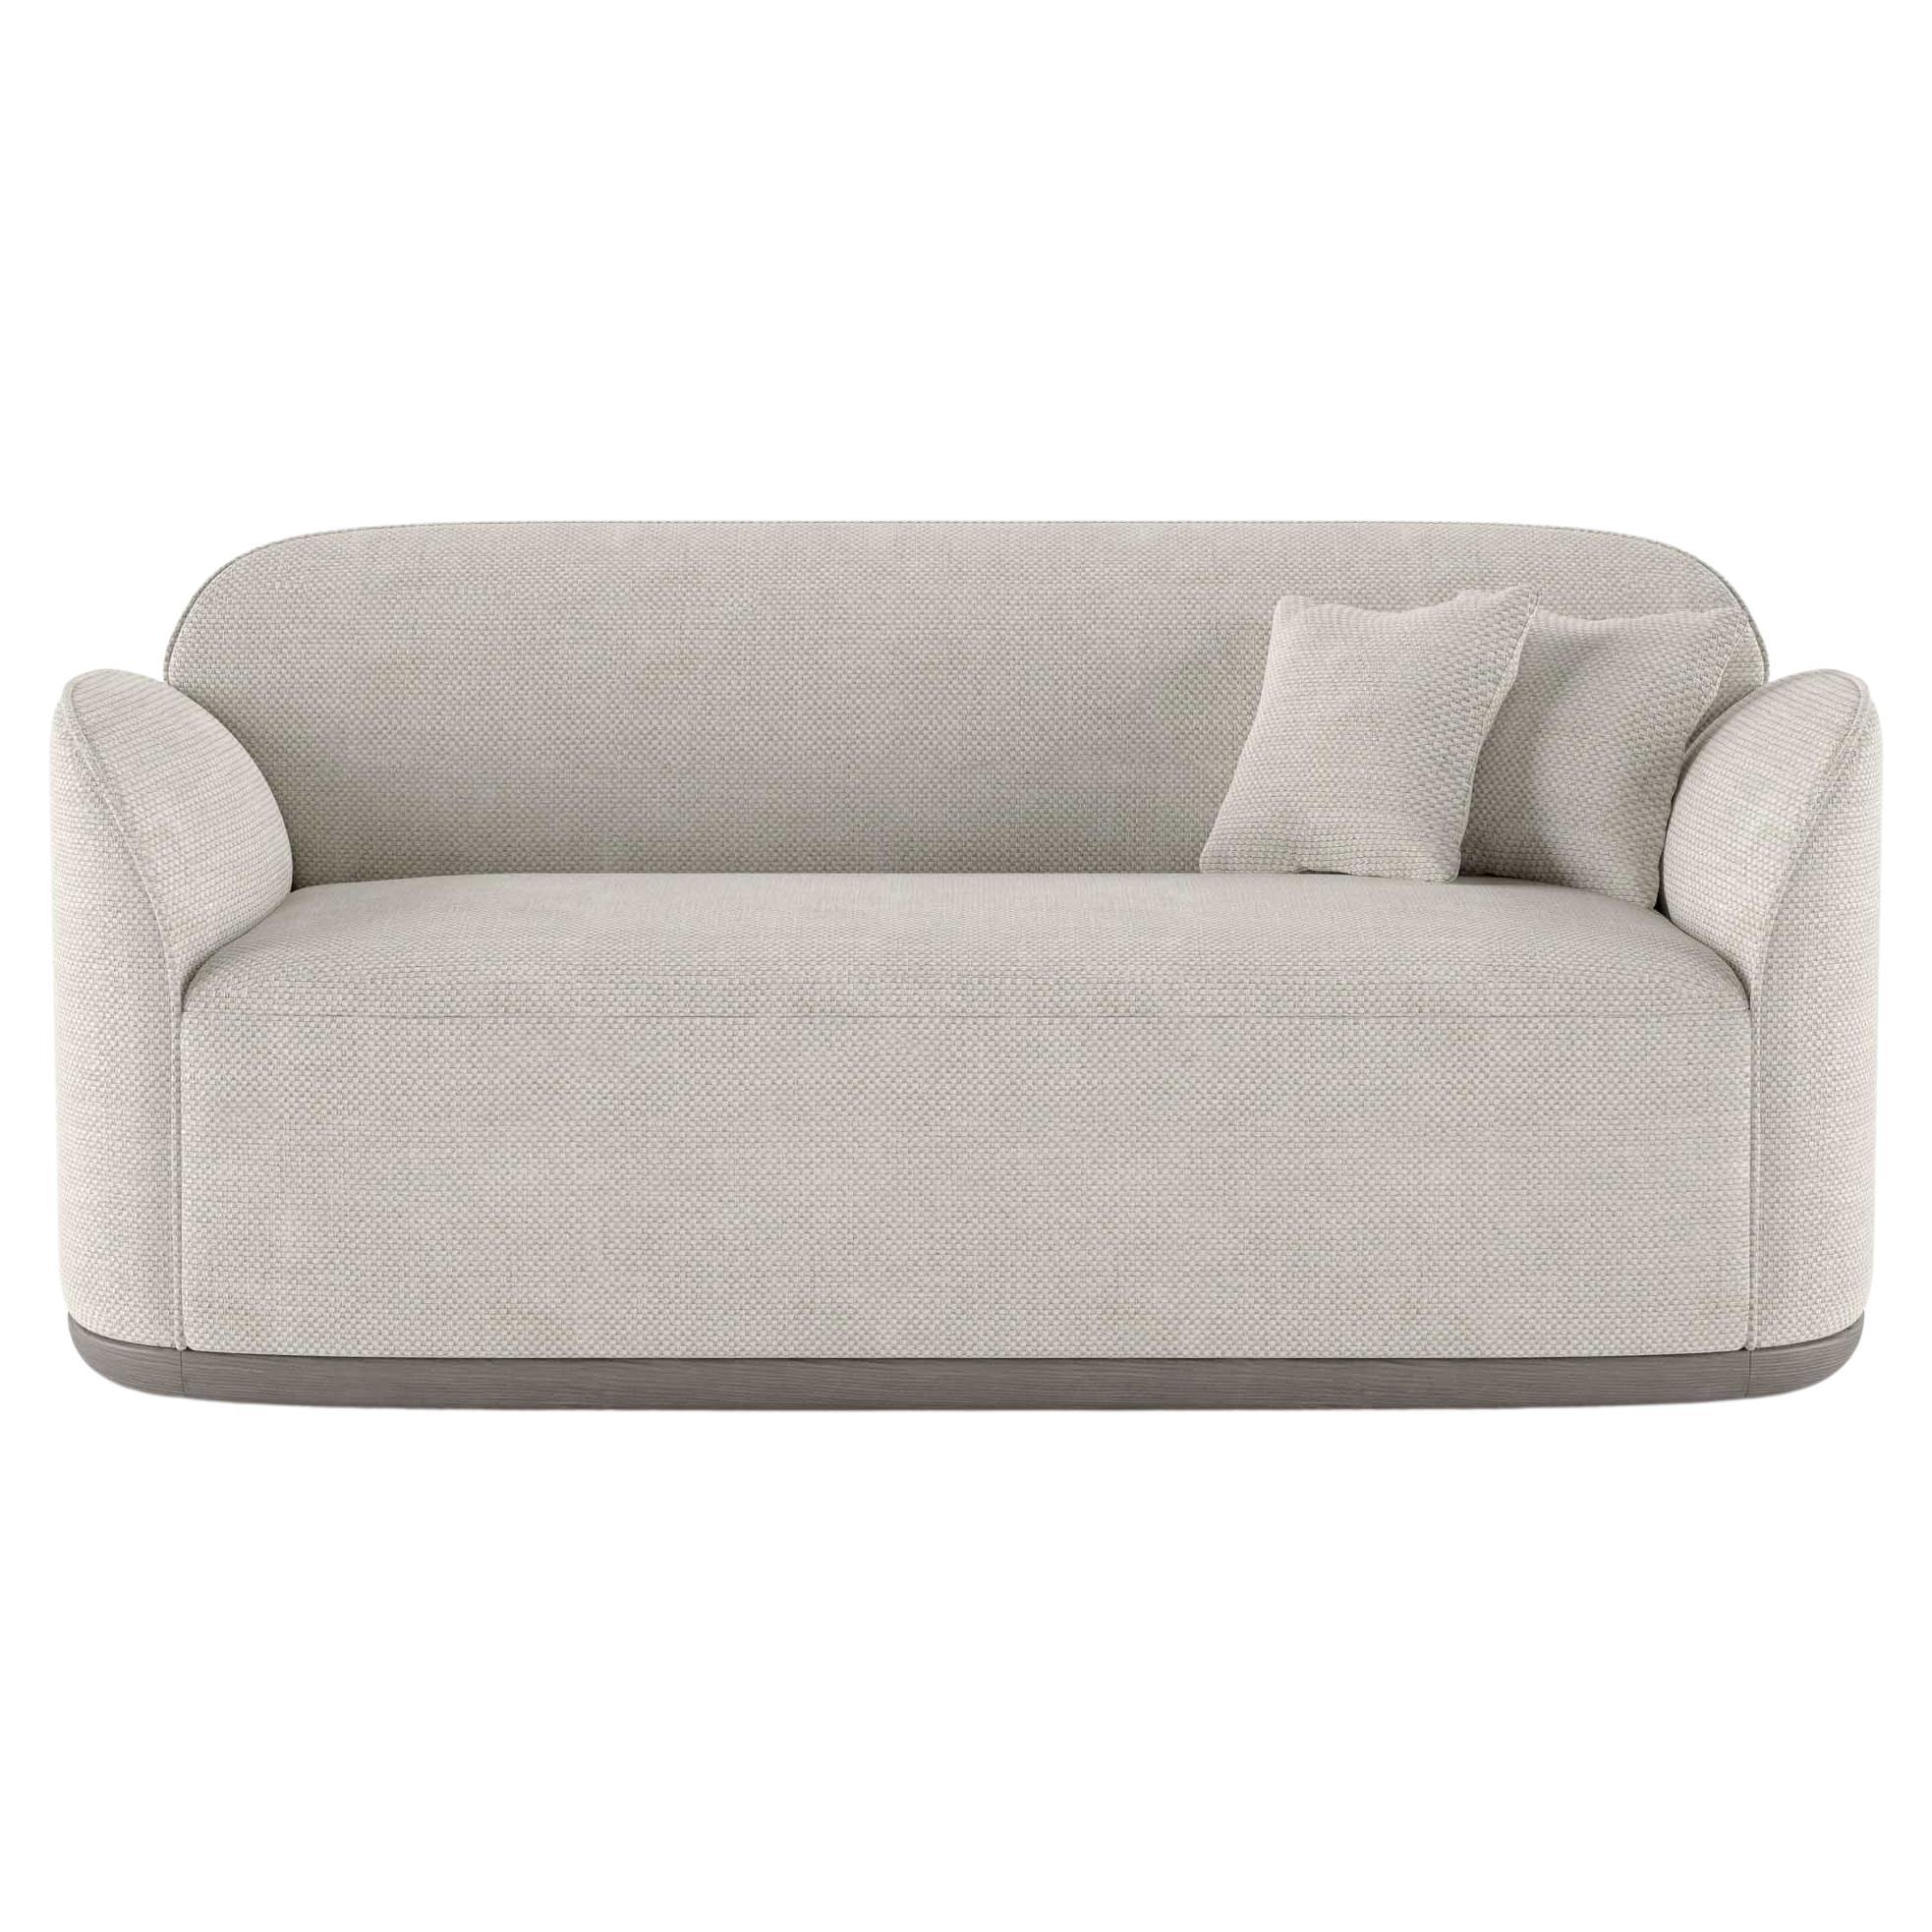 Contemporary Loveseat 'Unio' by Poiat, Fabric Fox 02 by Larsen For Sale